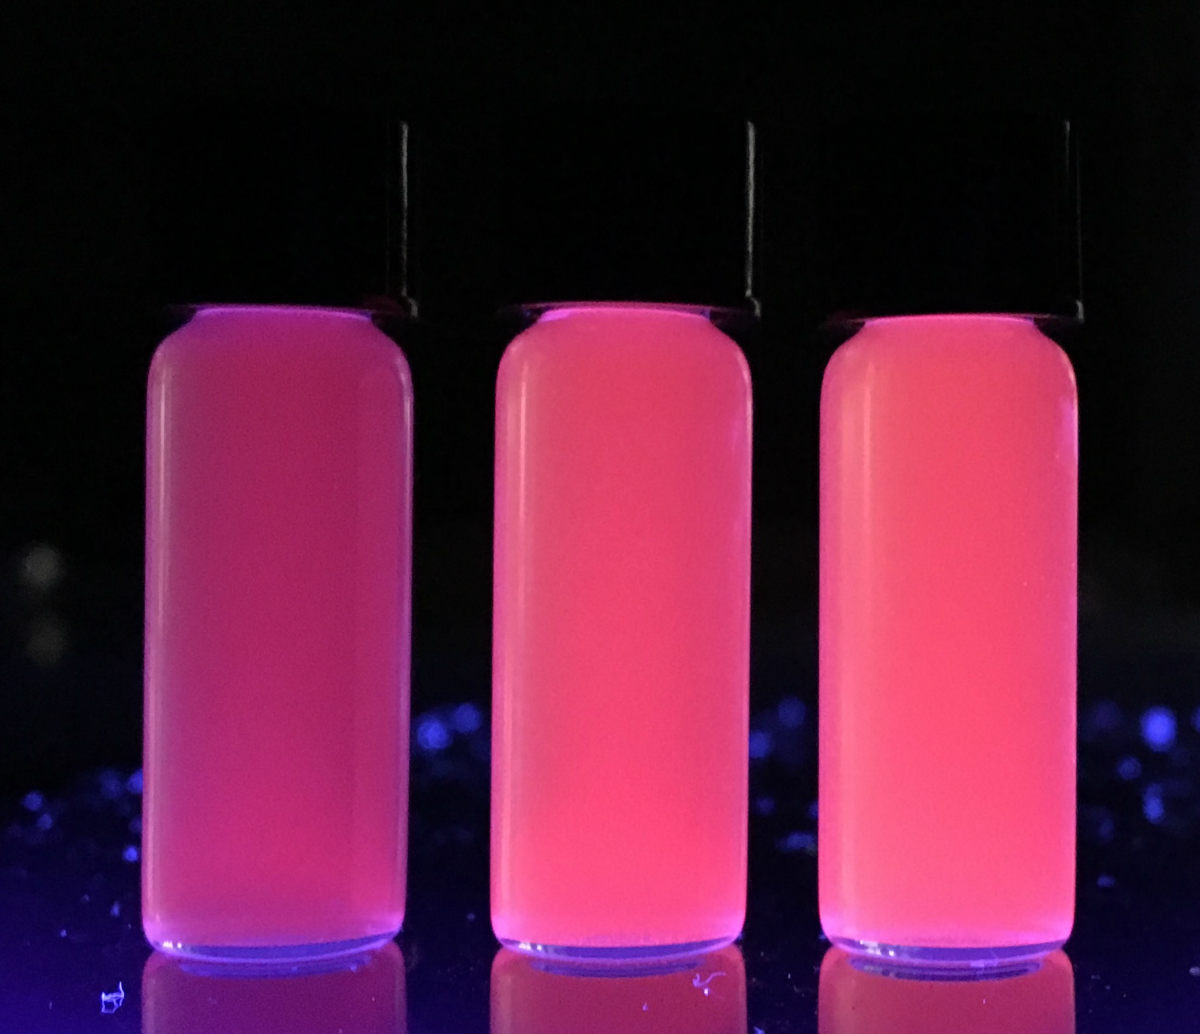 Silicon-based quantum dots, shown here in an enzyme-conjugated form under UV light.